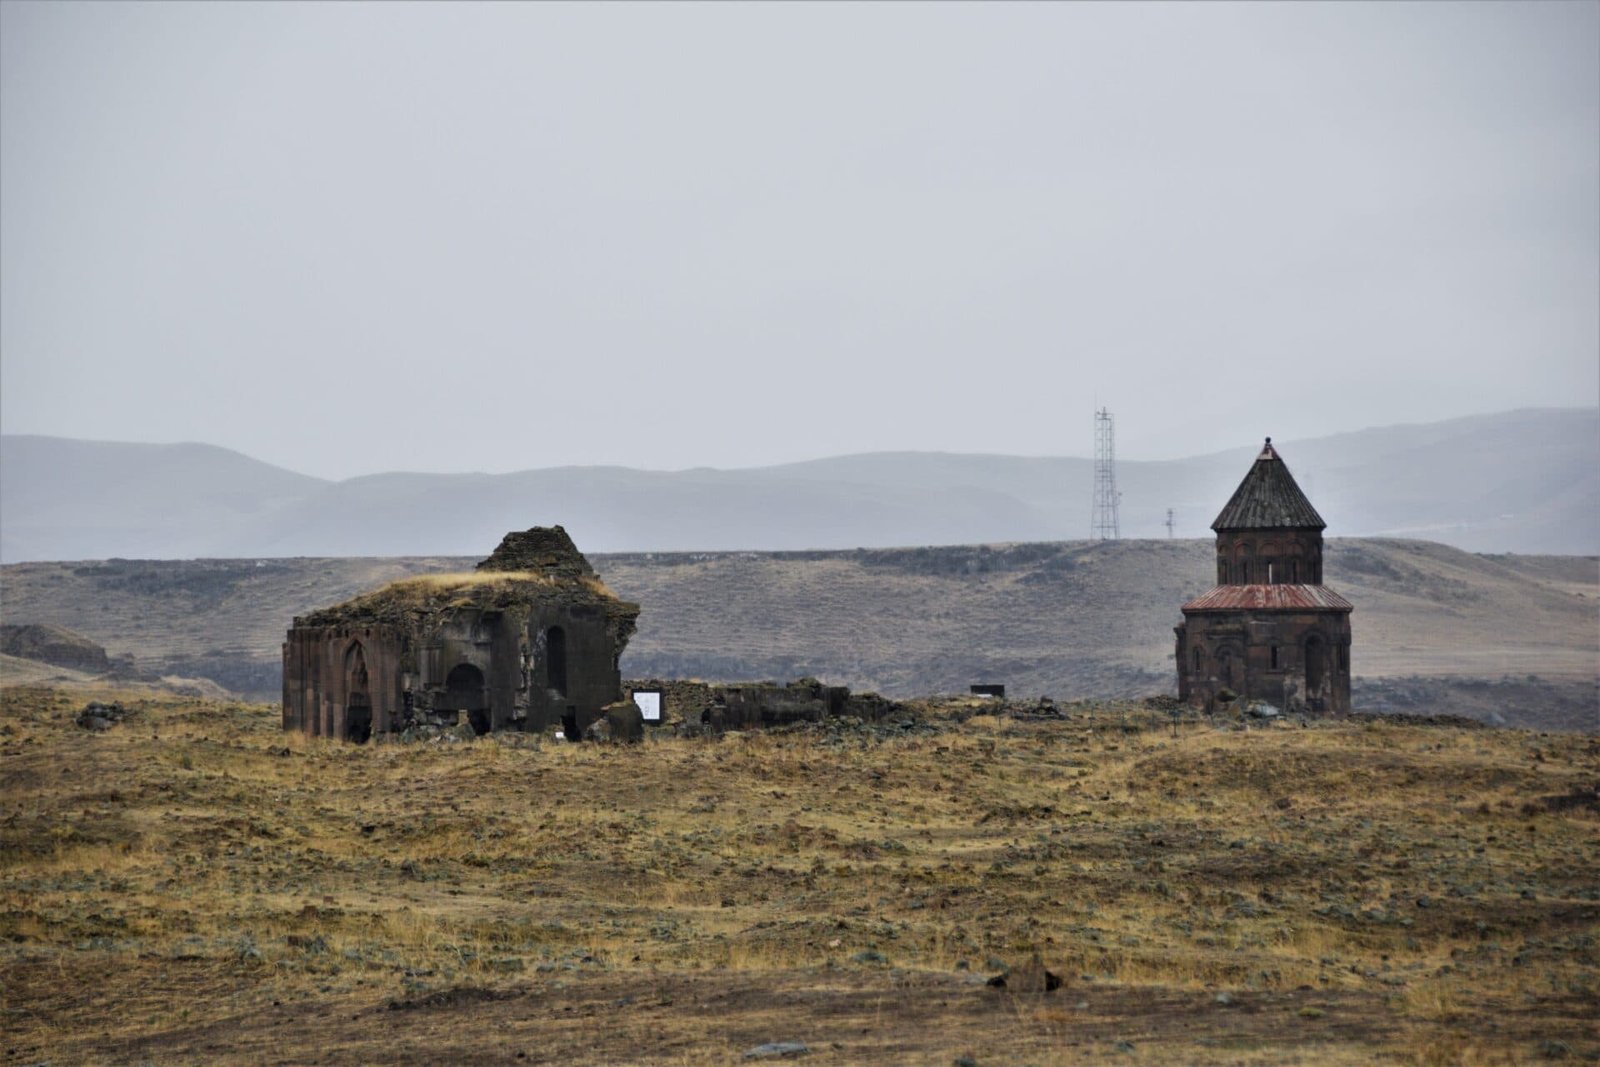 two abandoned church ruins stand in a withered field in the ancient city of Ani